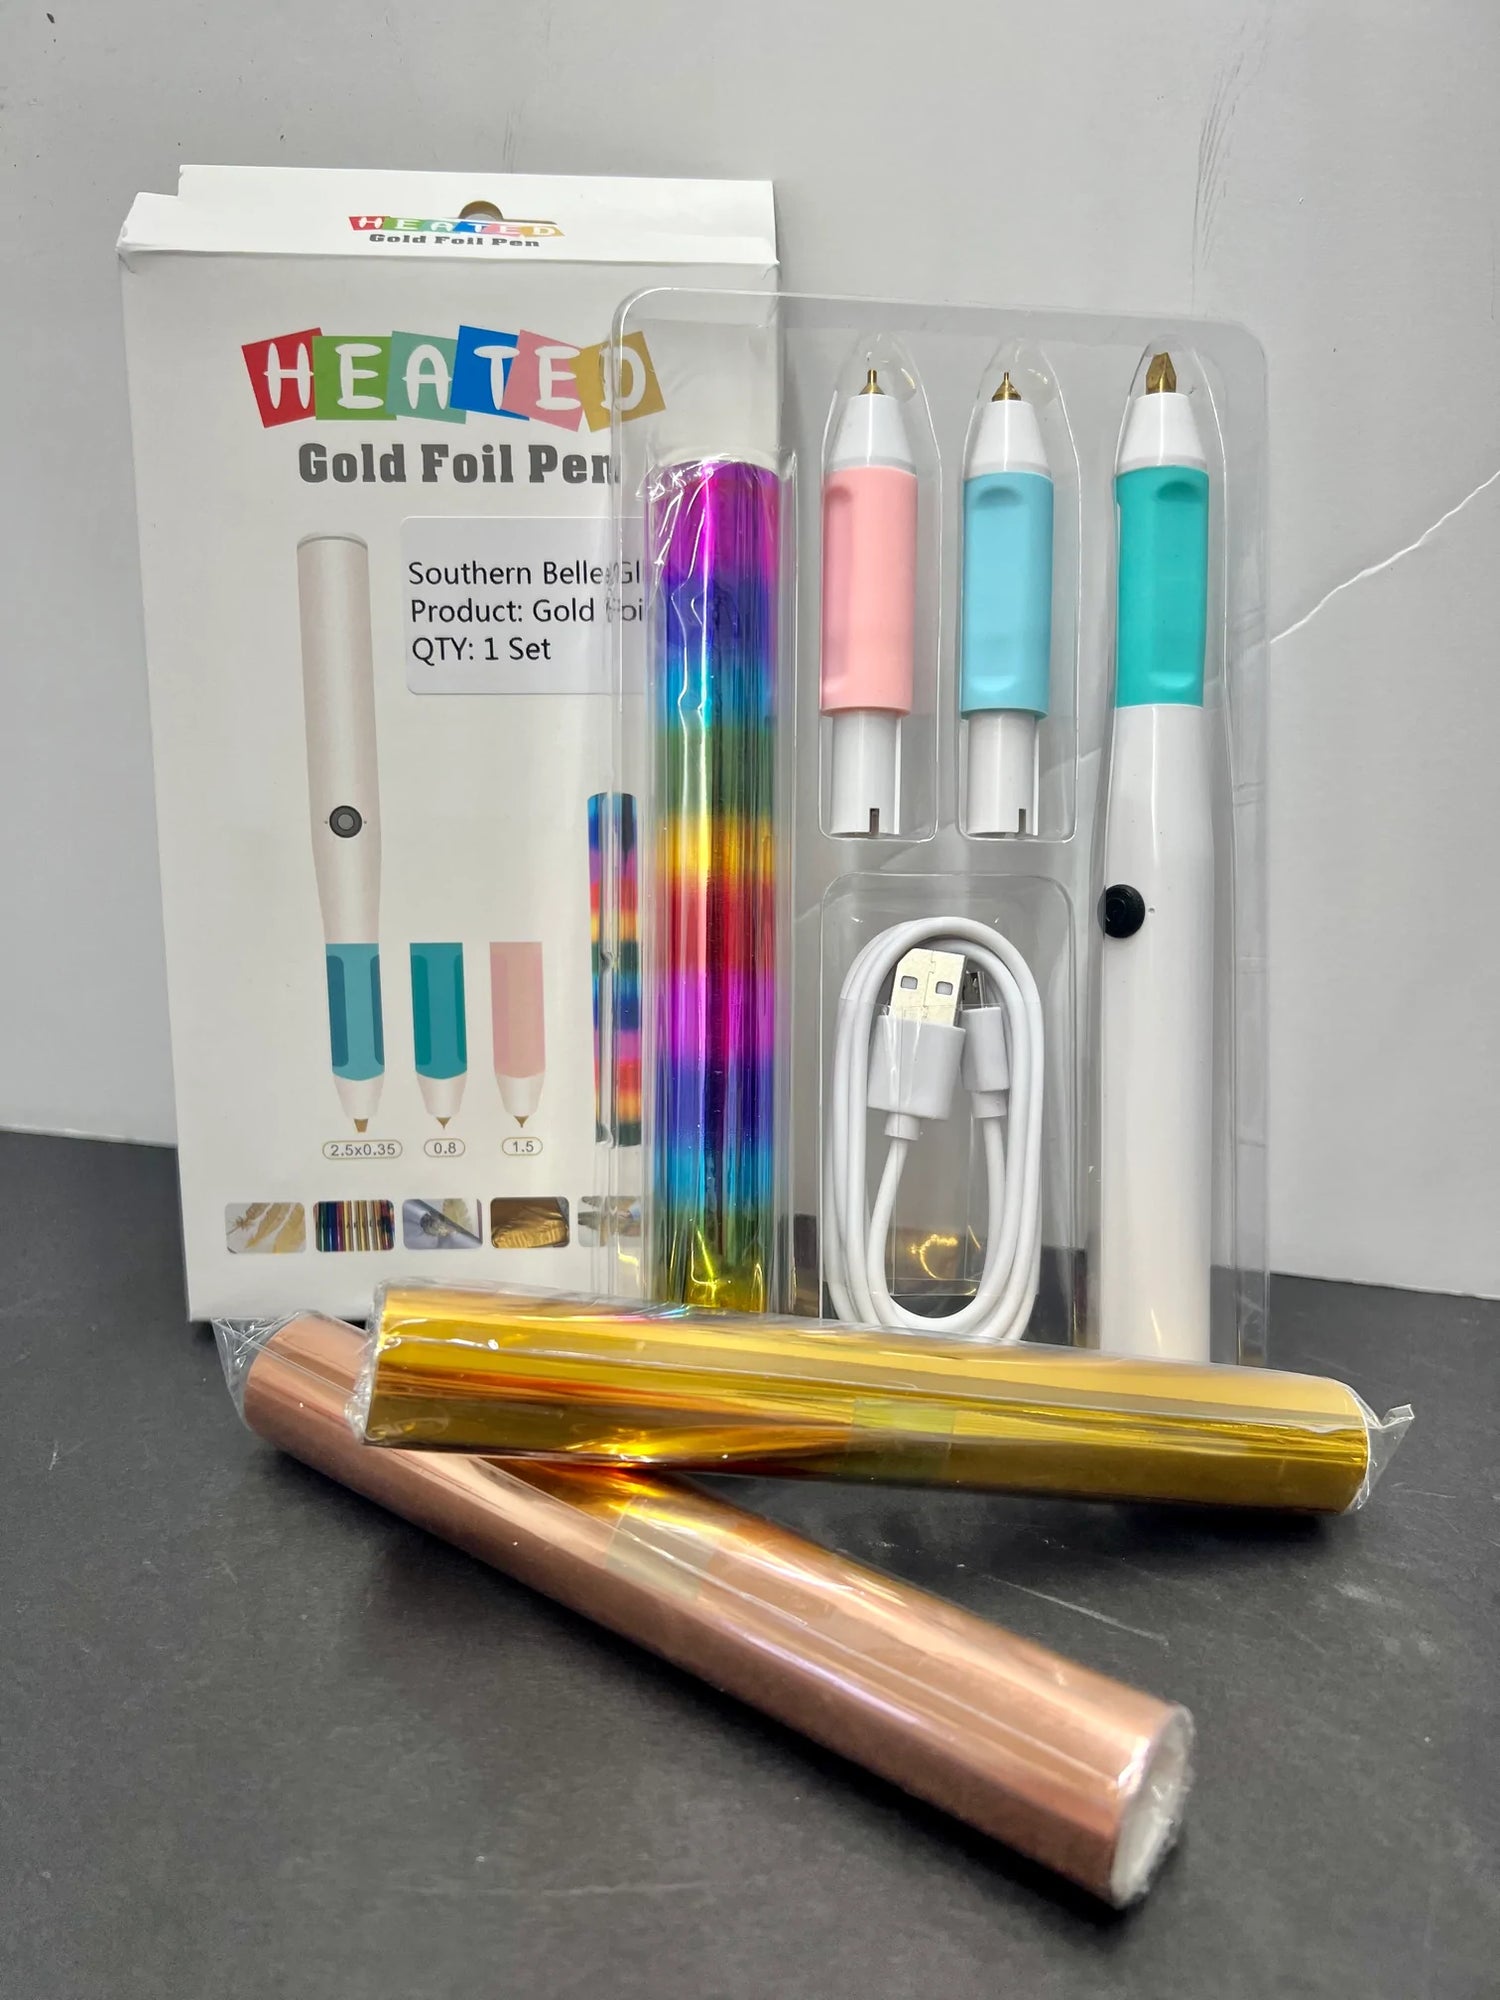 Walmeck Hot Heated Foil Pens Set, USB Heat Foil Pen for Scrapbooking Tool  Kits Gold & Silver Hot Foil Roll for Card Making Craft Scrapbooking Drawing